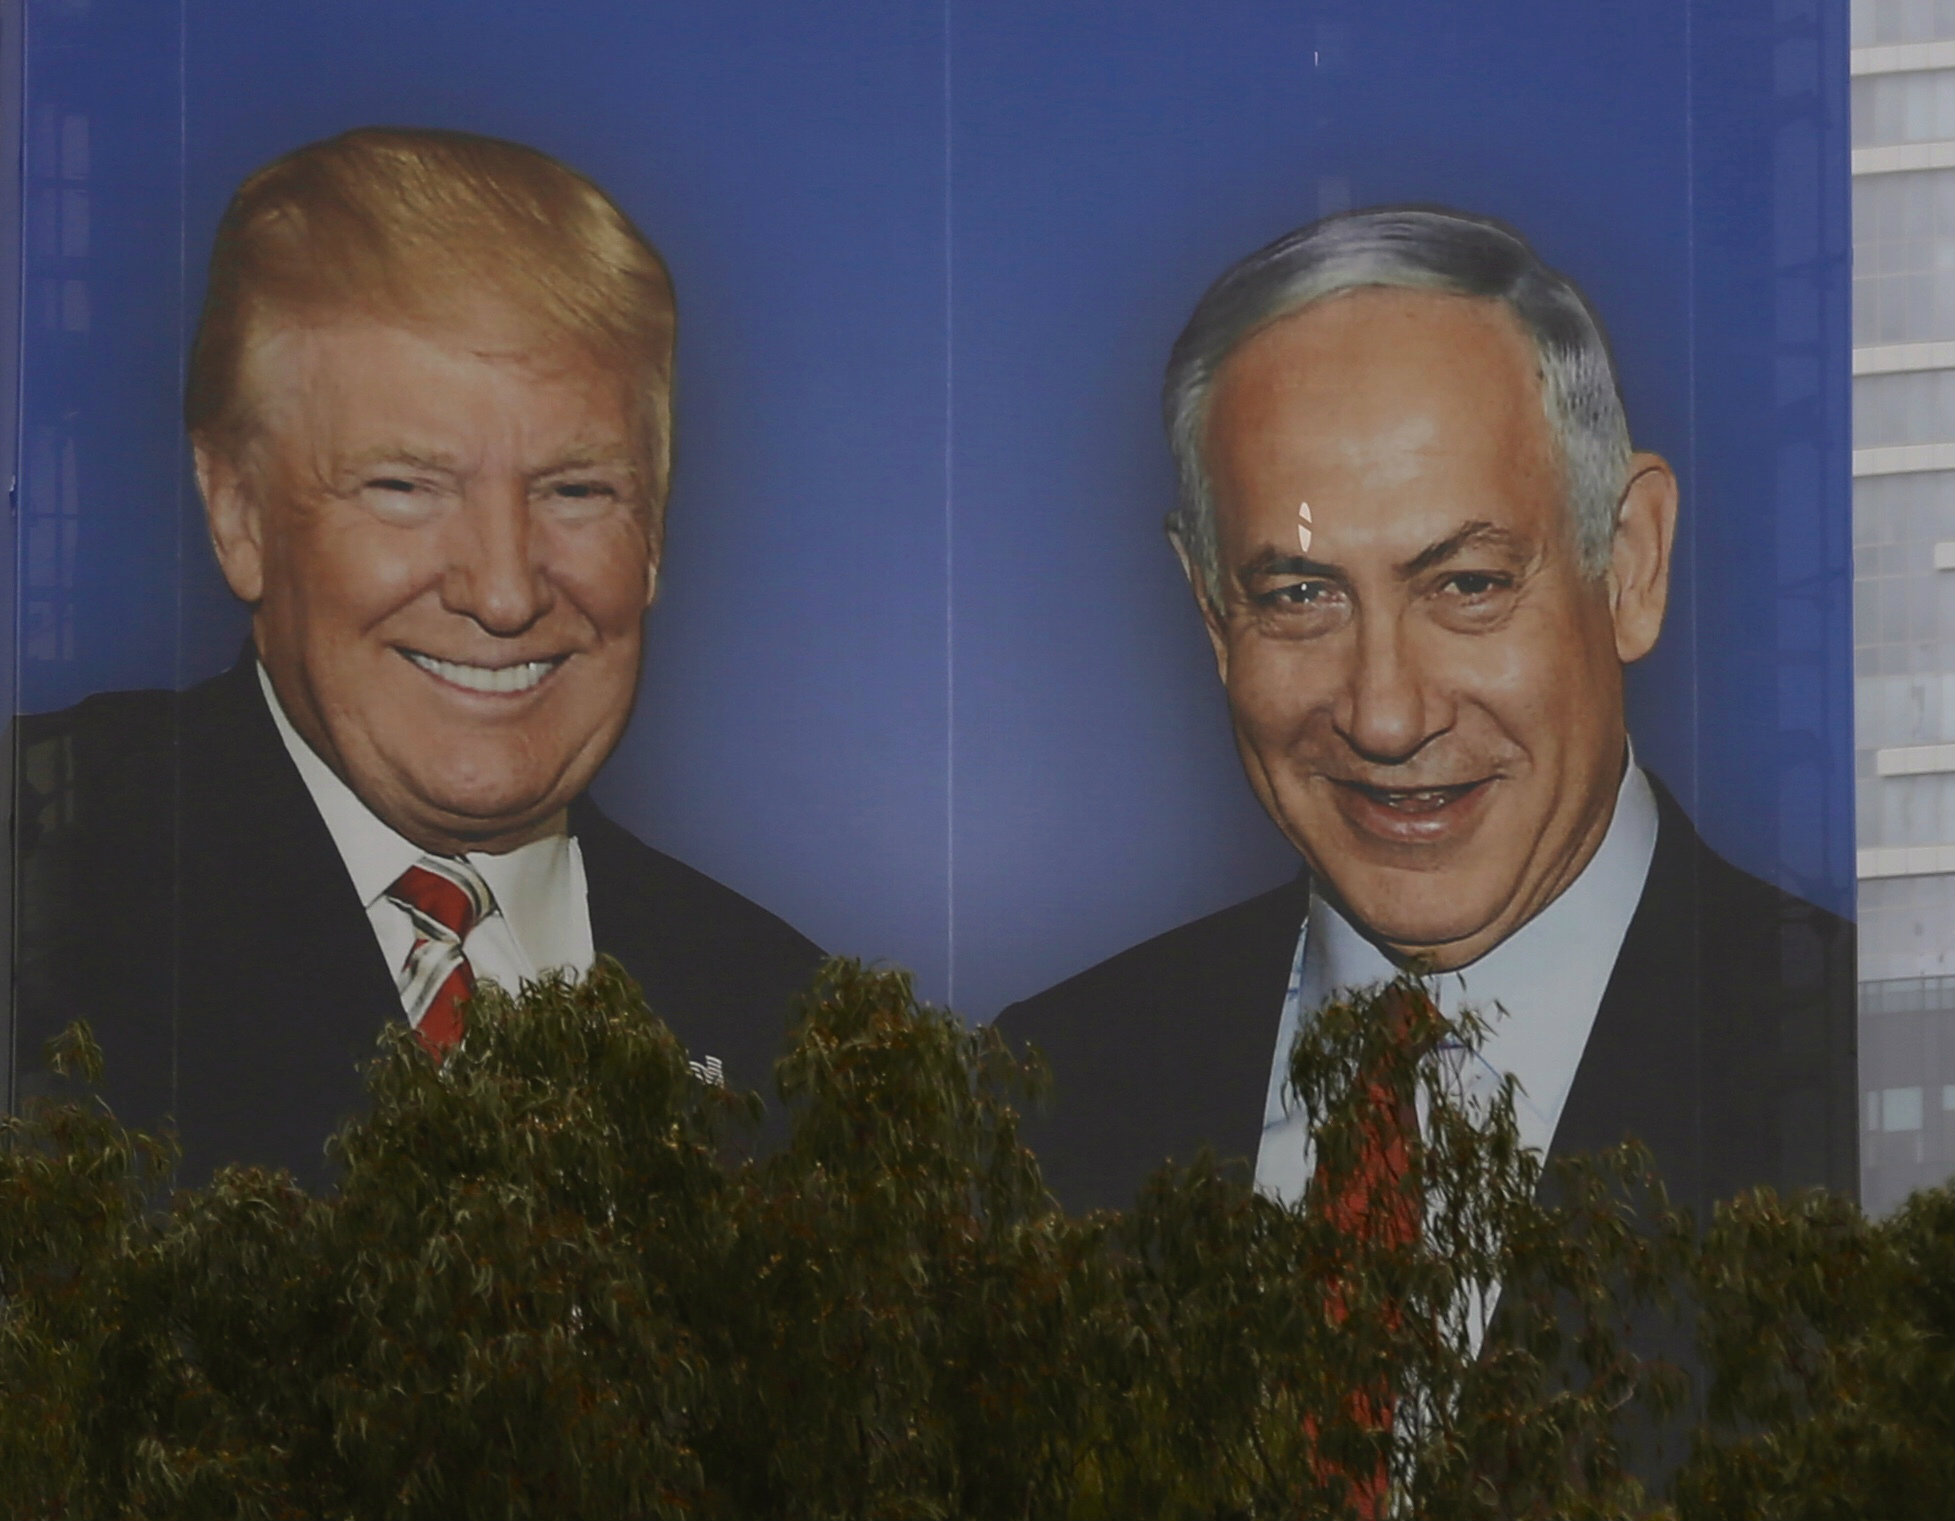 Netanyahu channels Trump in Israel's election campaign